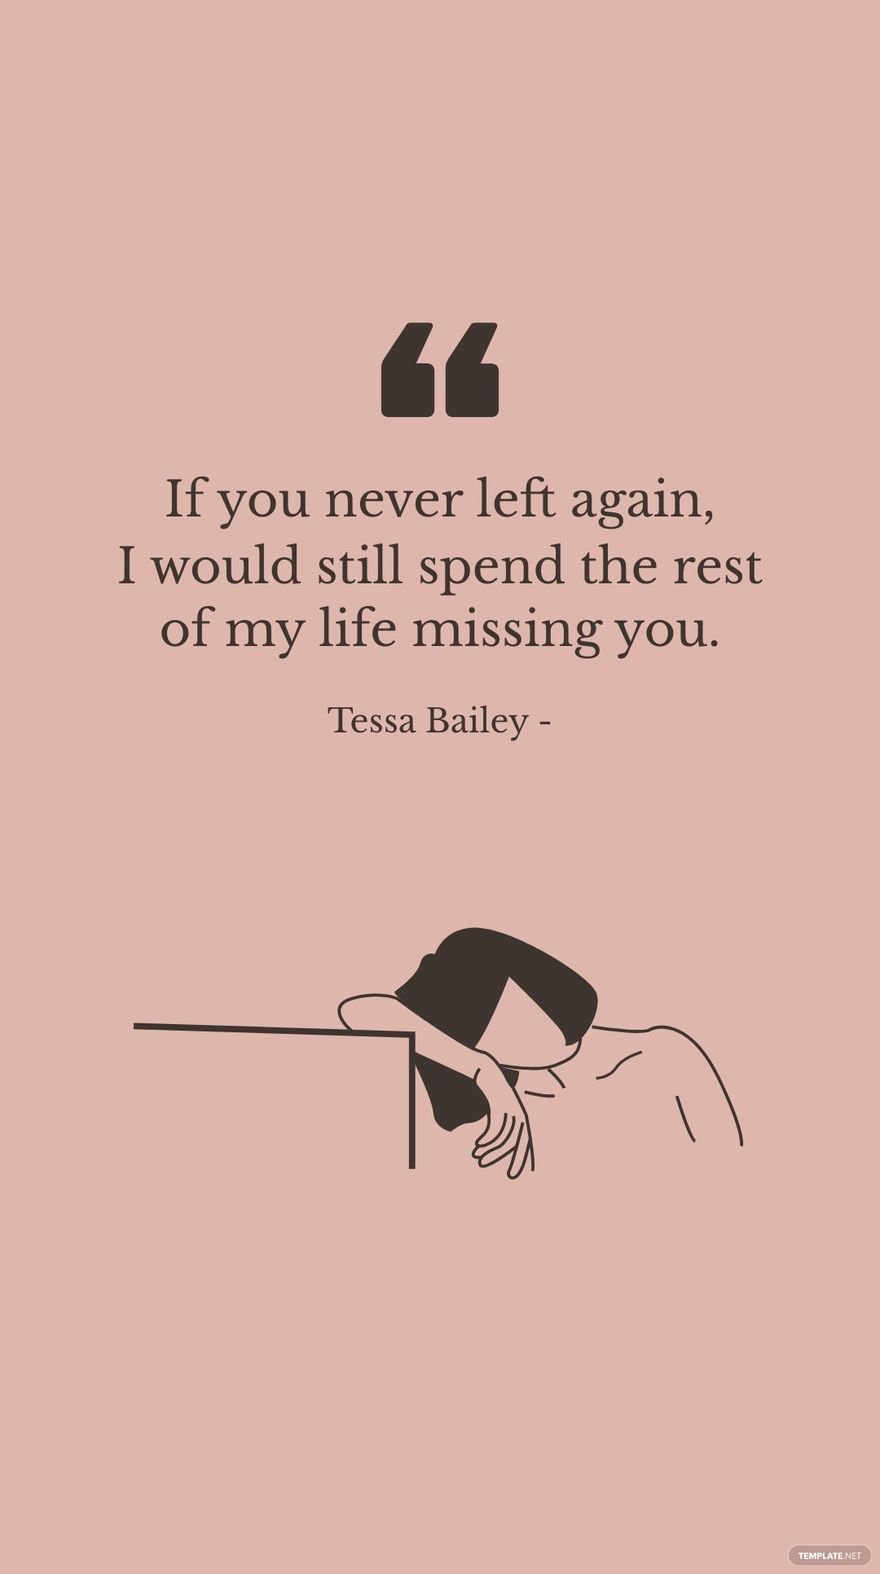 Free Tessa Bailey - If you never left again, I would still spend the rest of my life missing you.